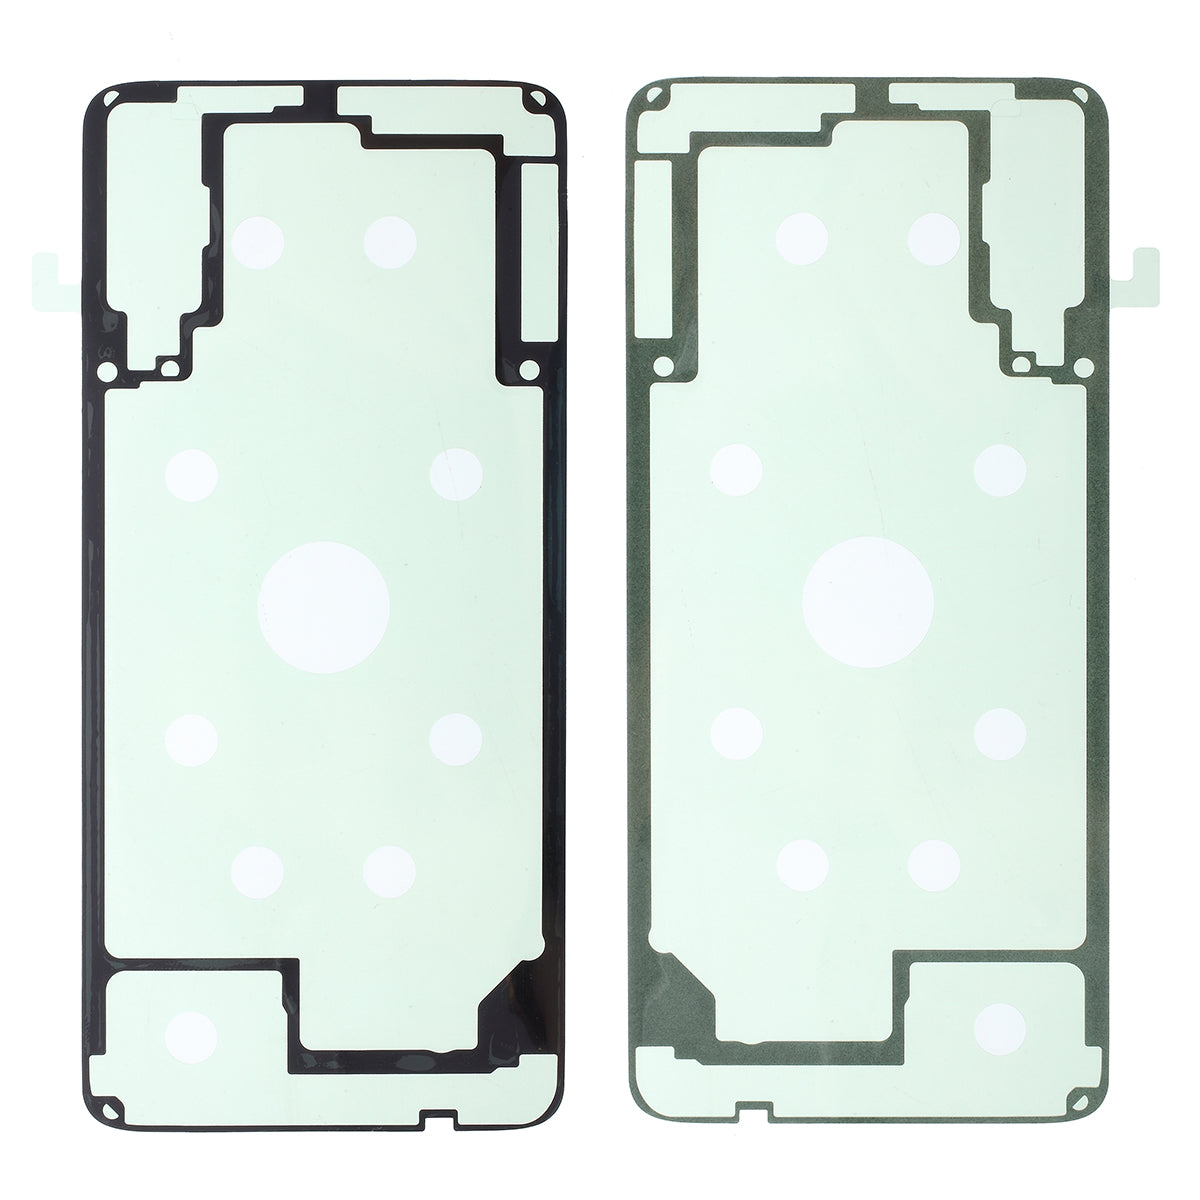 OEM Battery Door Cover Adhesive Sticker for Samsung Galaxy A70 SM-A705